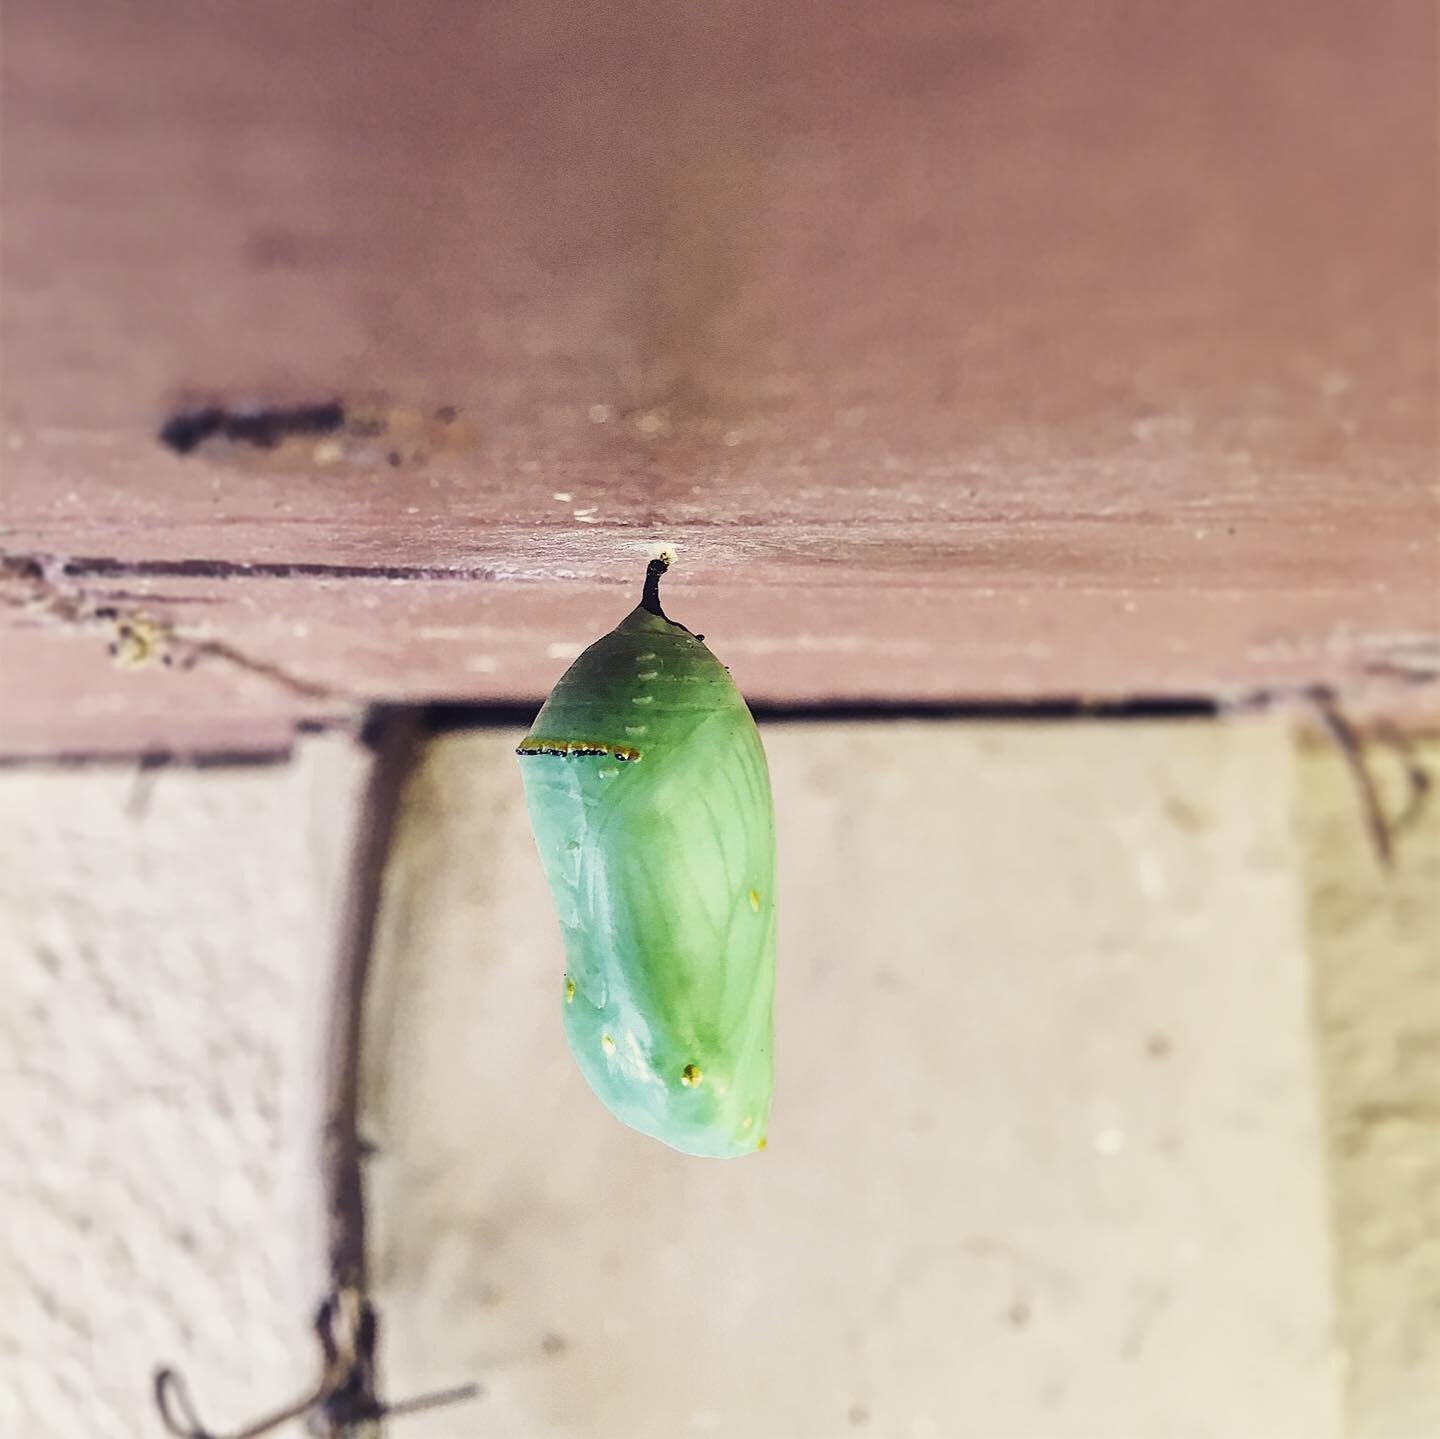 Happy solstice from the garden and all its creatures (including me). I have a head cold - but I needed to venture out to check on this chrysalis. Did you know it takes four generations of monarchs to complete the migration cycle? #monarchbutterfly #w